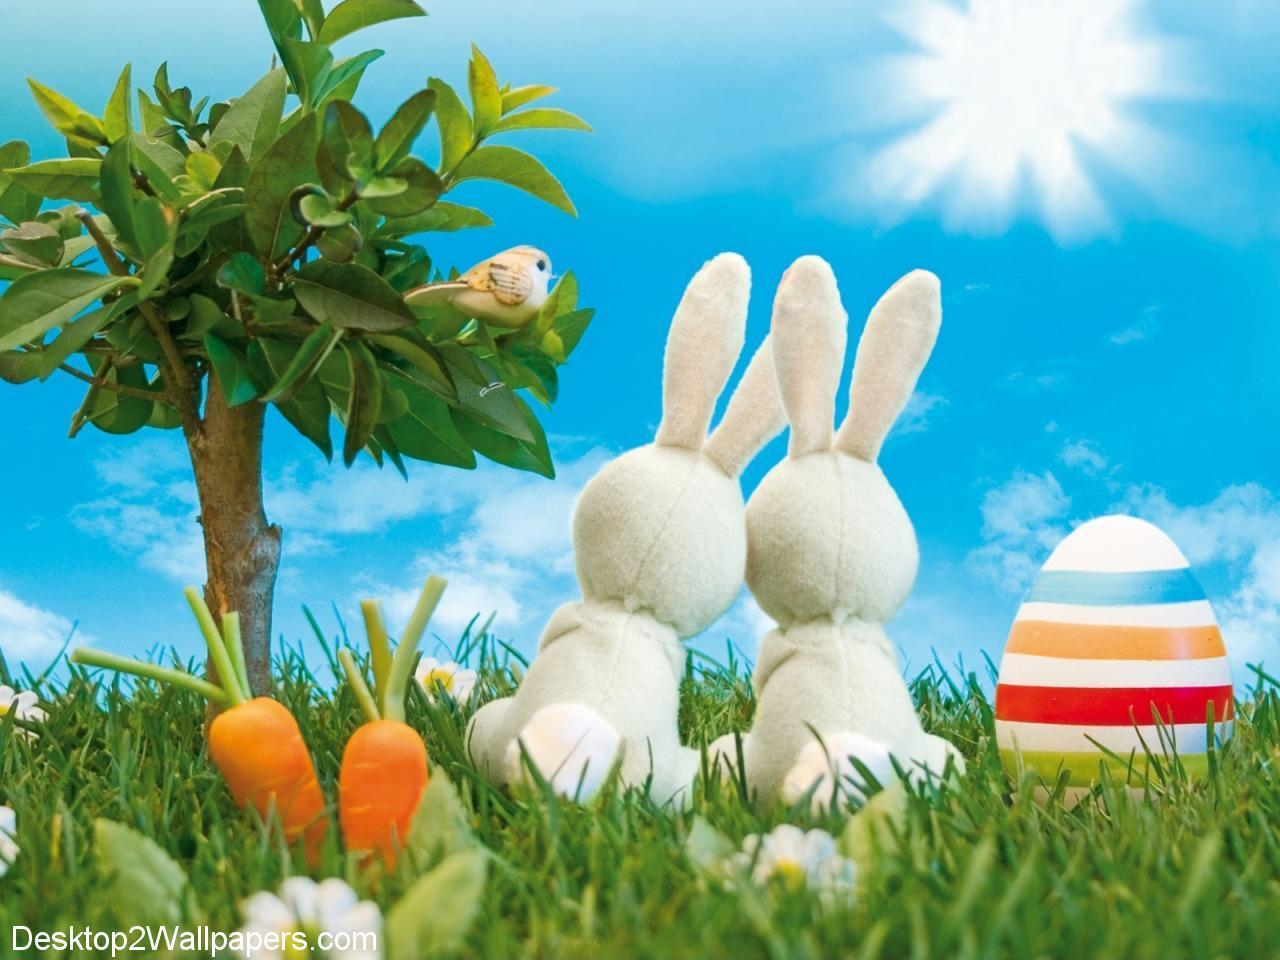 Cute Happy Easter Wallpaper. coolstyle wallpaper